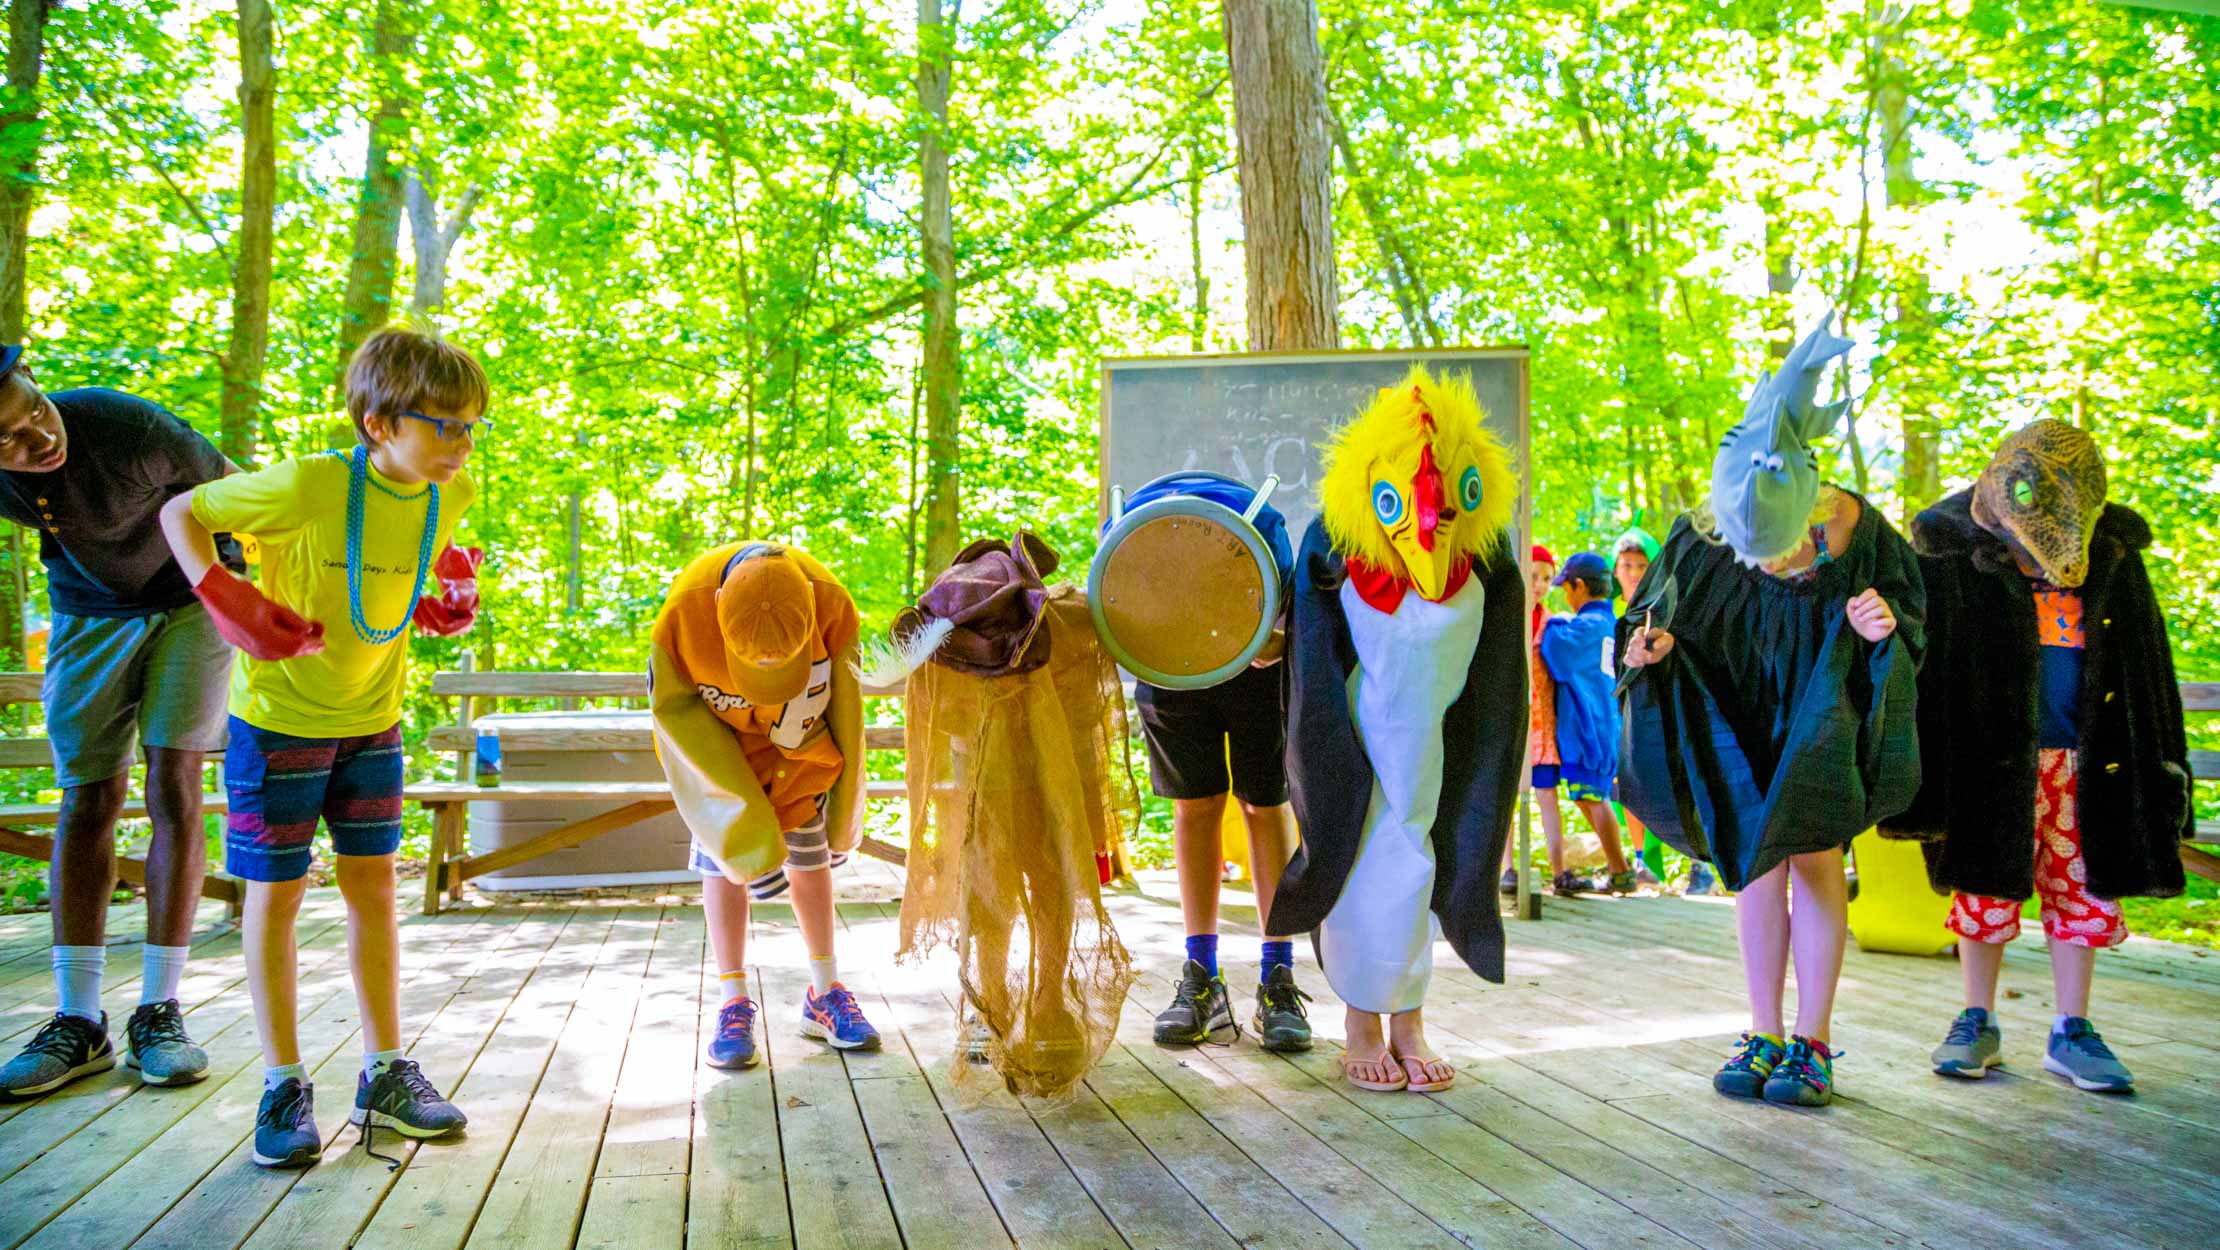 Campers in costume bowing after a skit